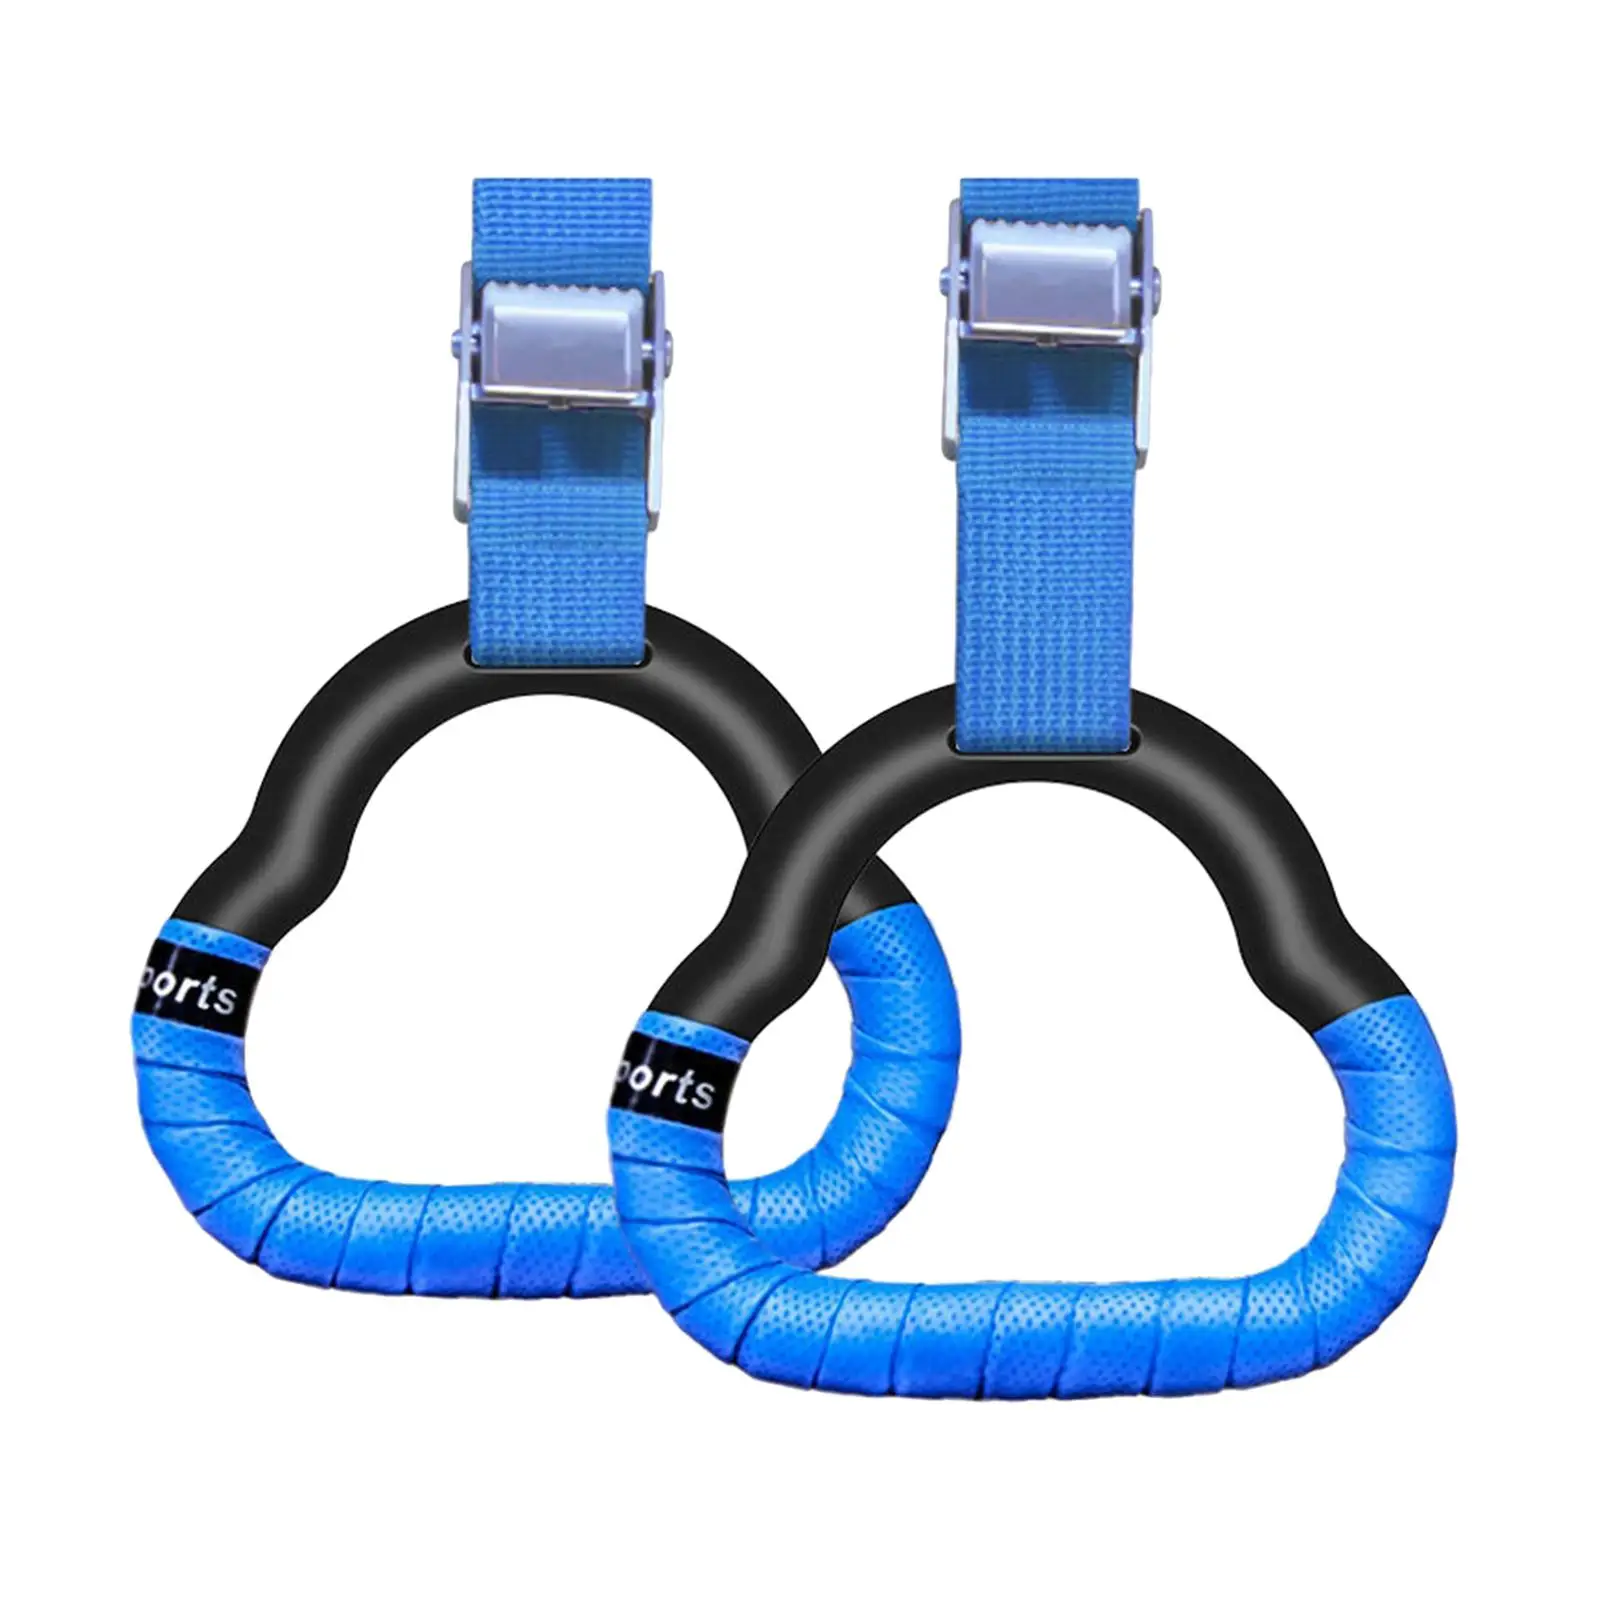 Gymnastics Rings Adjustable Strap Kids Non Slip Handle Pull up Exercise Rings Training Gym Ring for Full Body Workout Home Gym